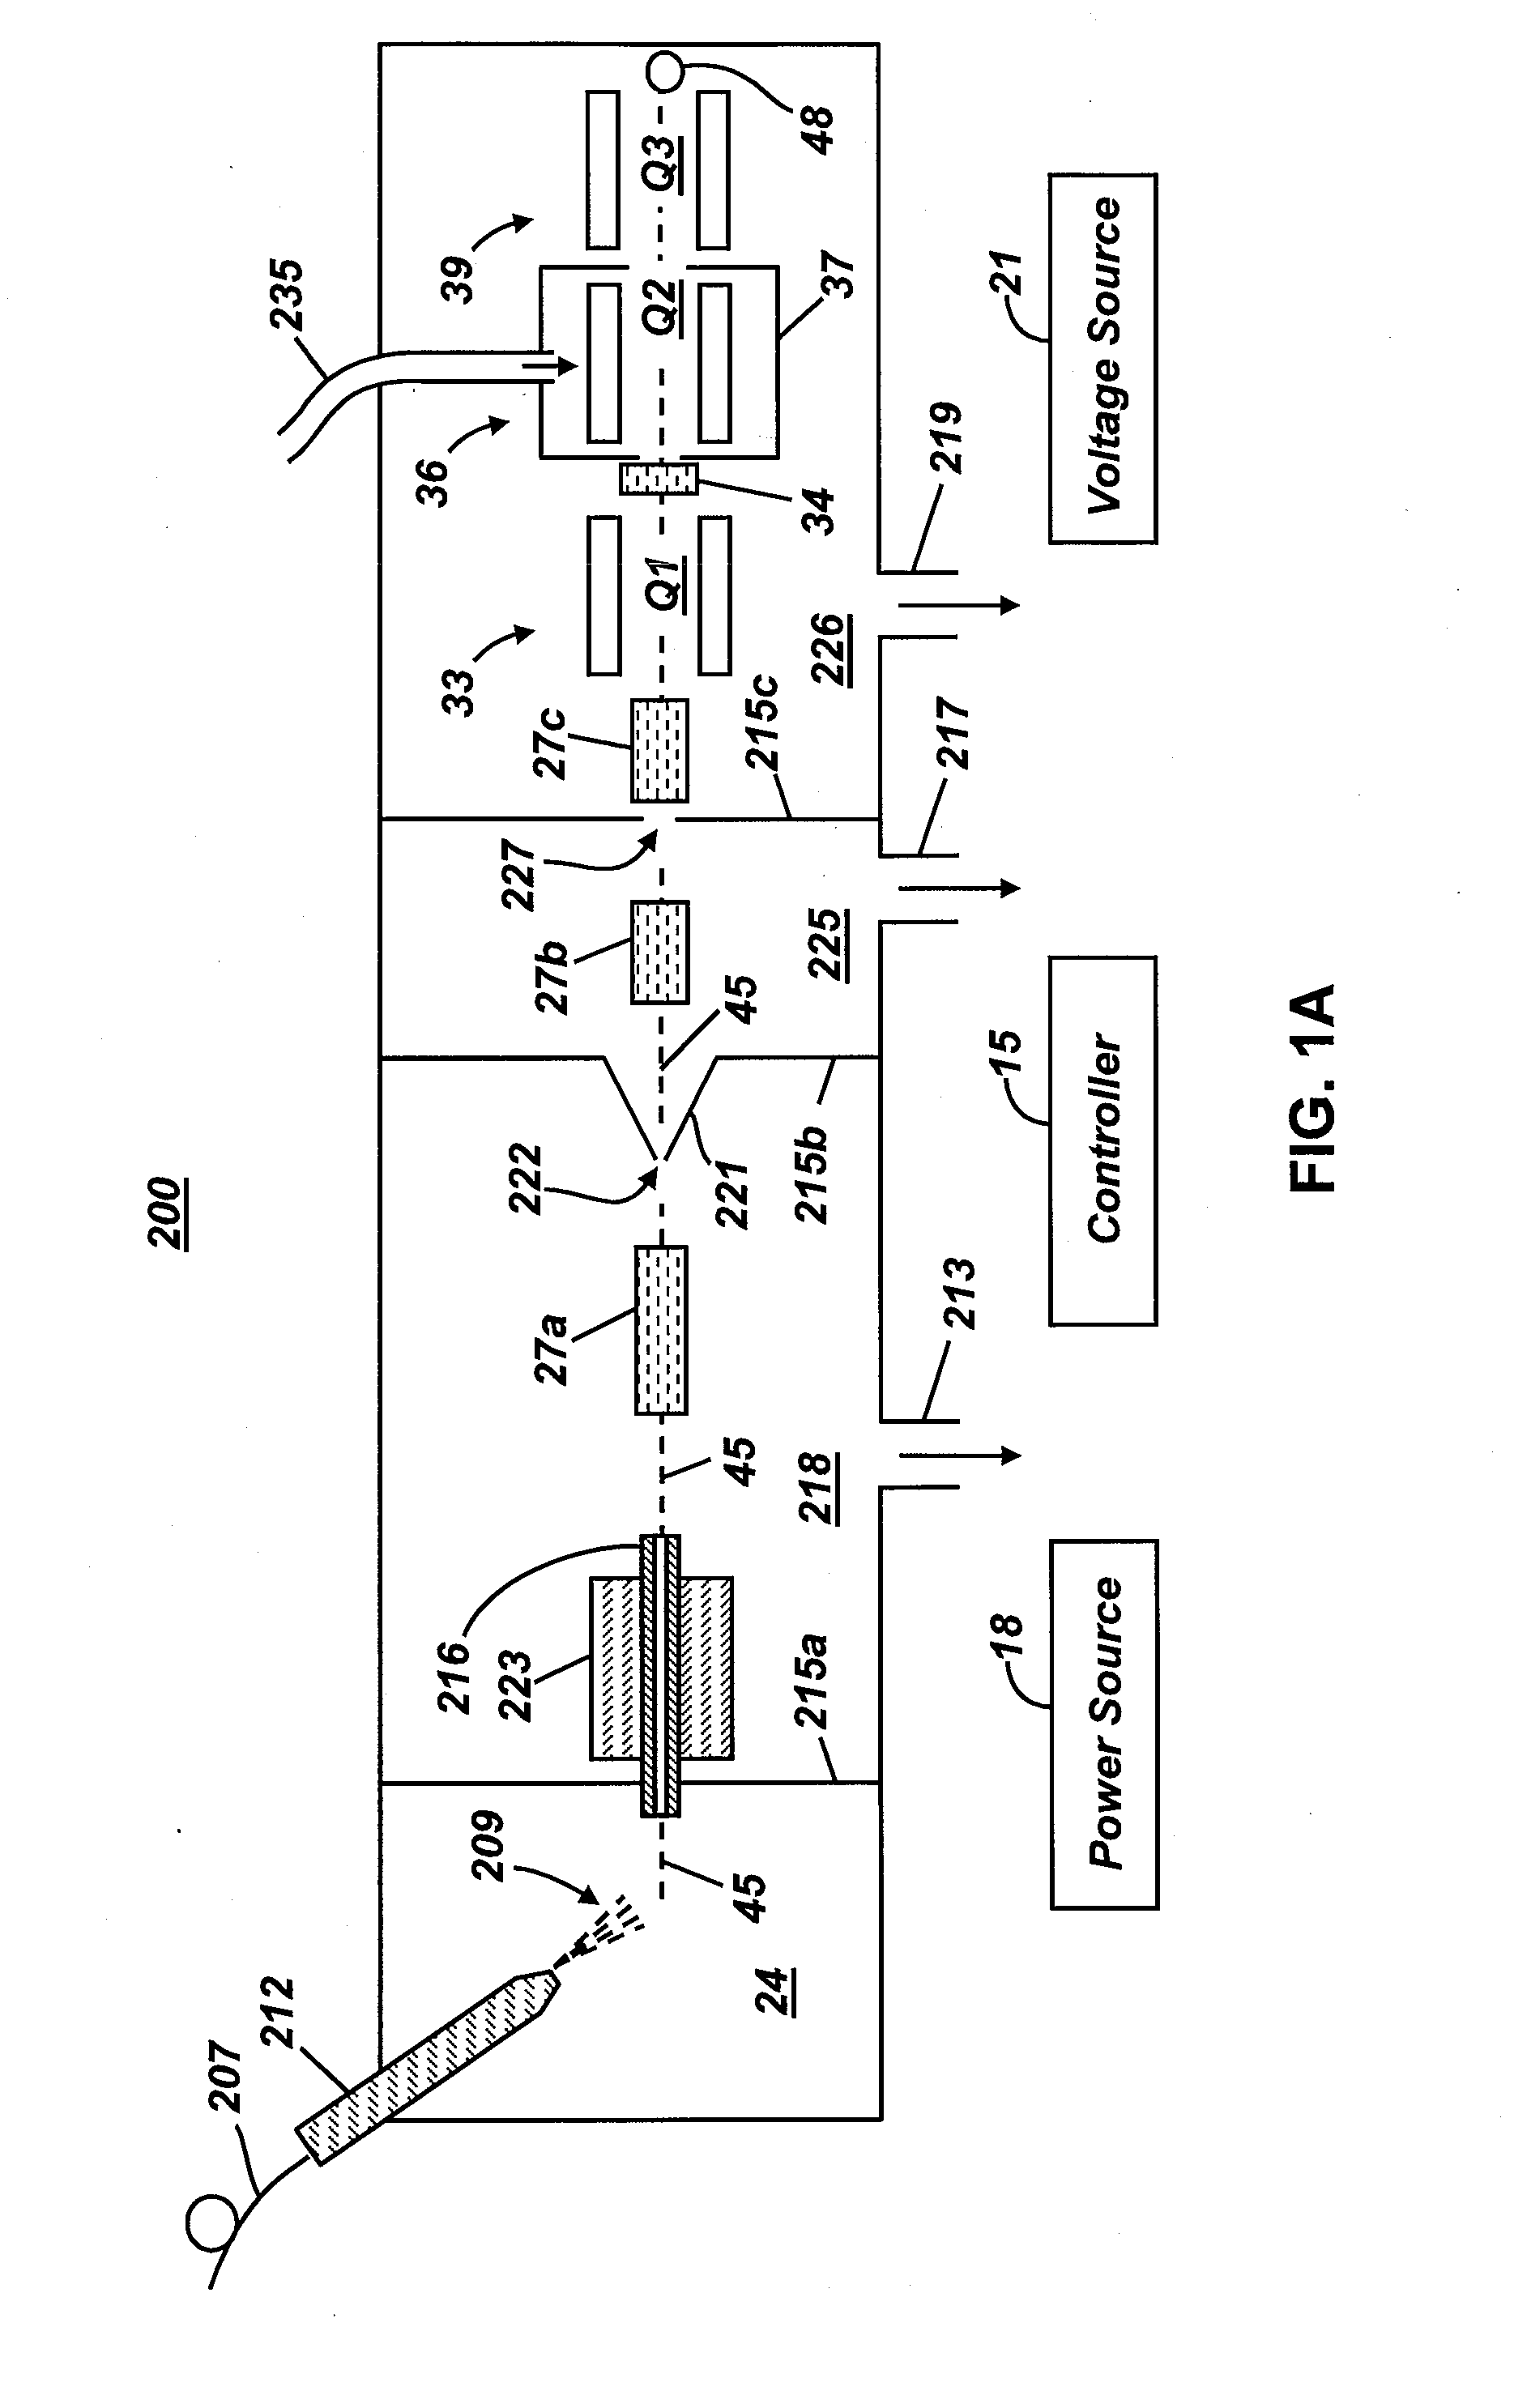 Method for Automated Checking and Adjustment of Mass Spectrometer Calibration